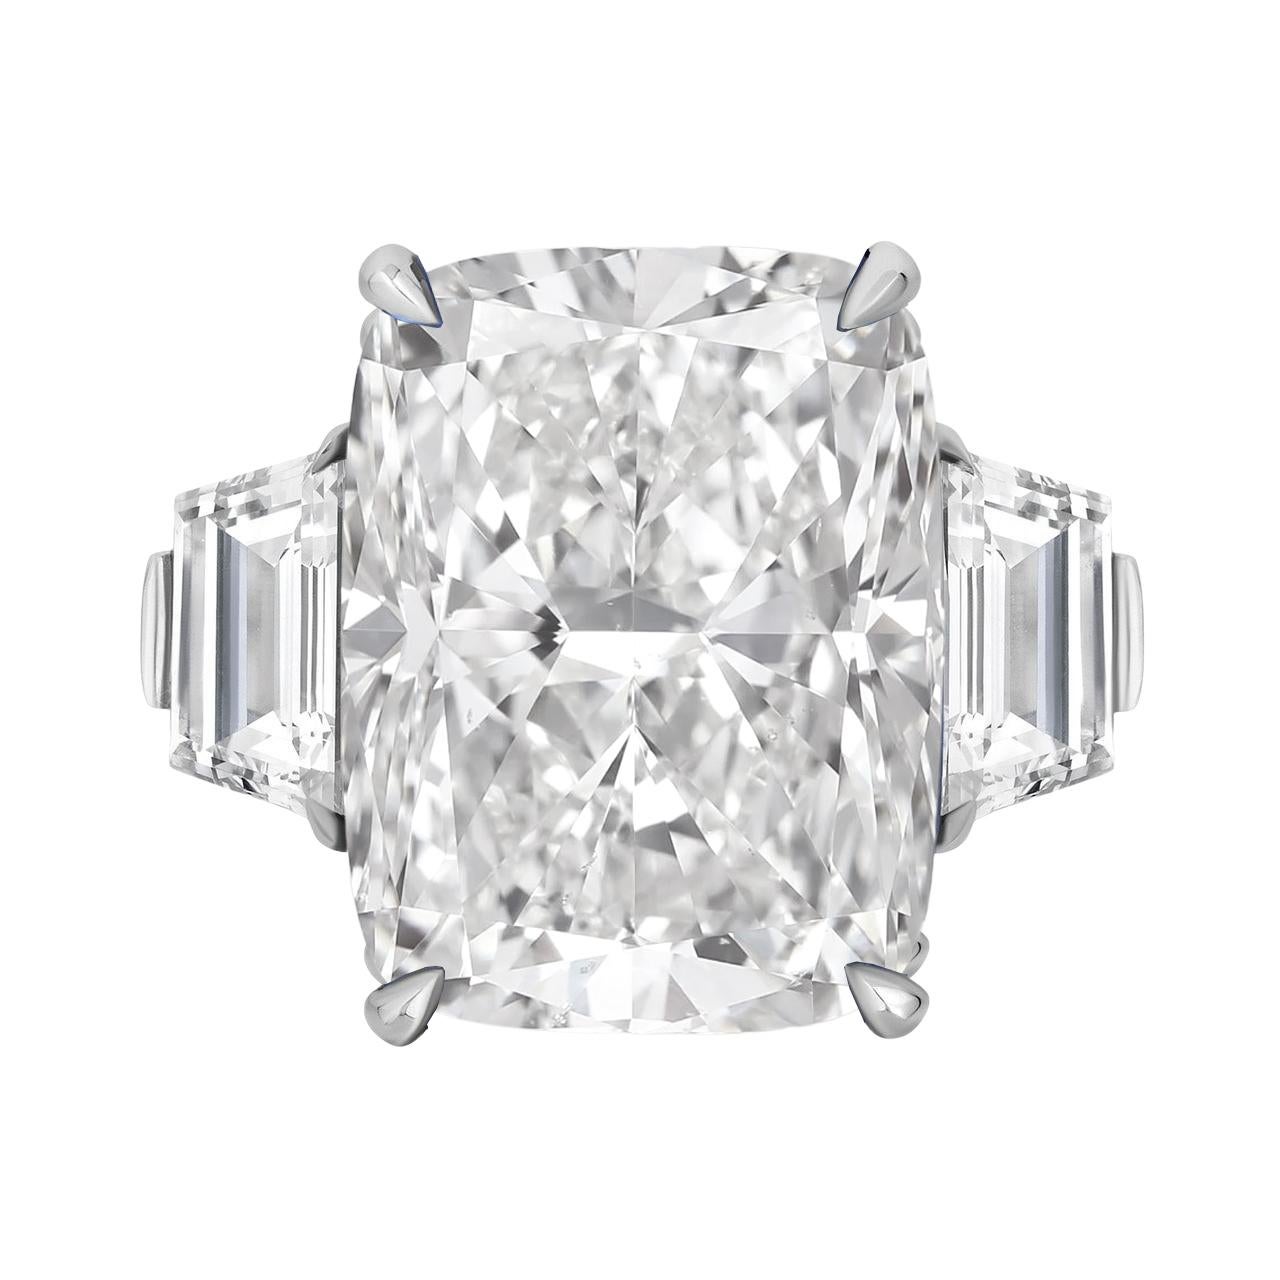 Discover the pinnacle of diamond craftsmanship with this exceptional 10-carat cushion cut diamond ring, a testament to timeless elegance. Certified by the Gemological Institute of America (GIA), this remarkable piece boasts an F color rating,